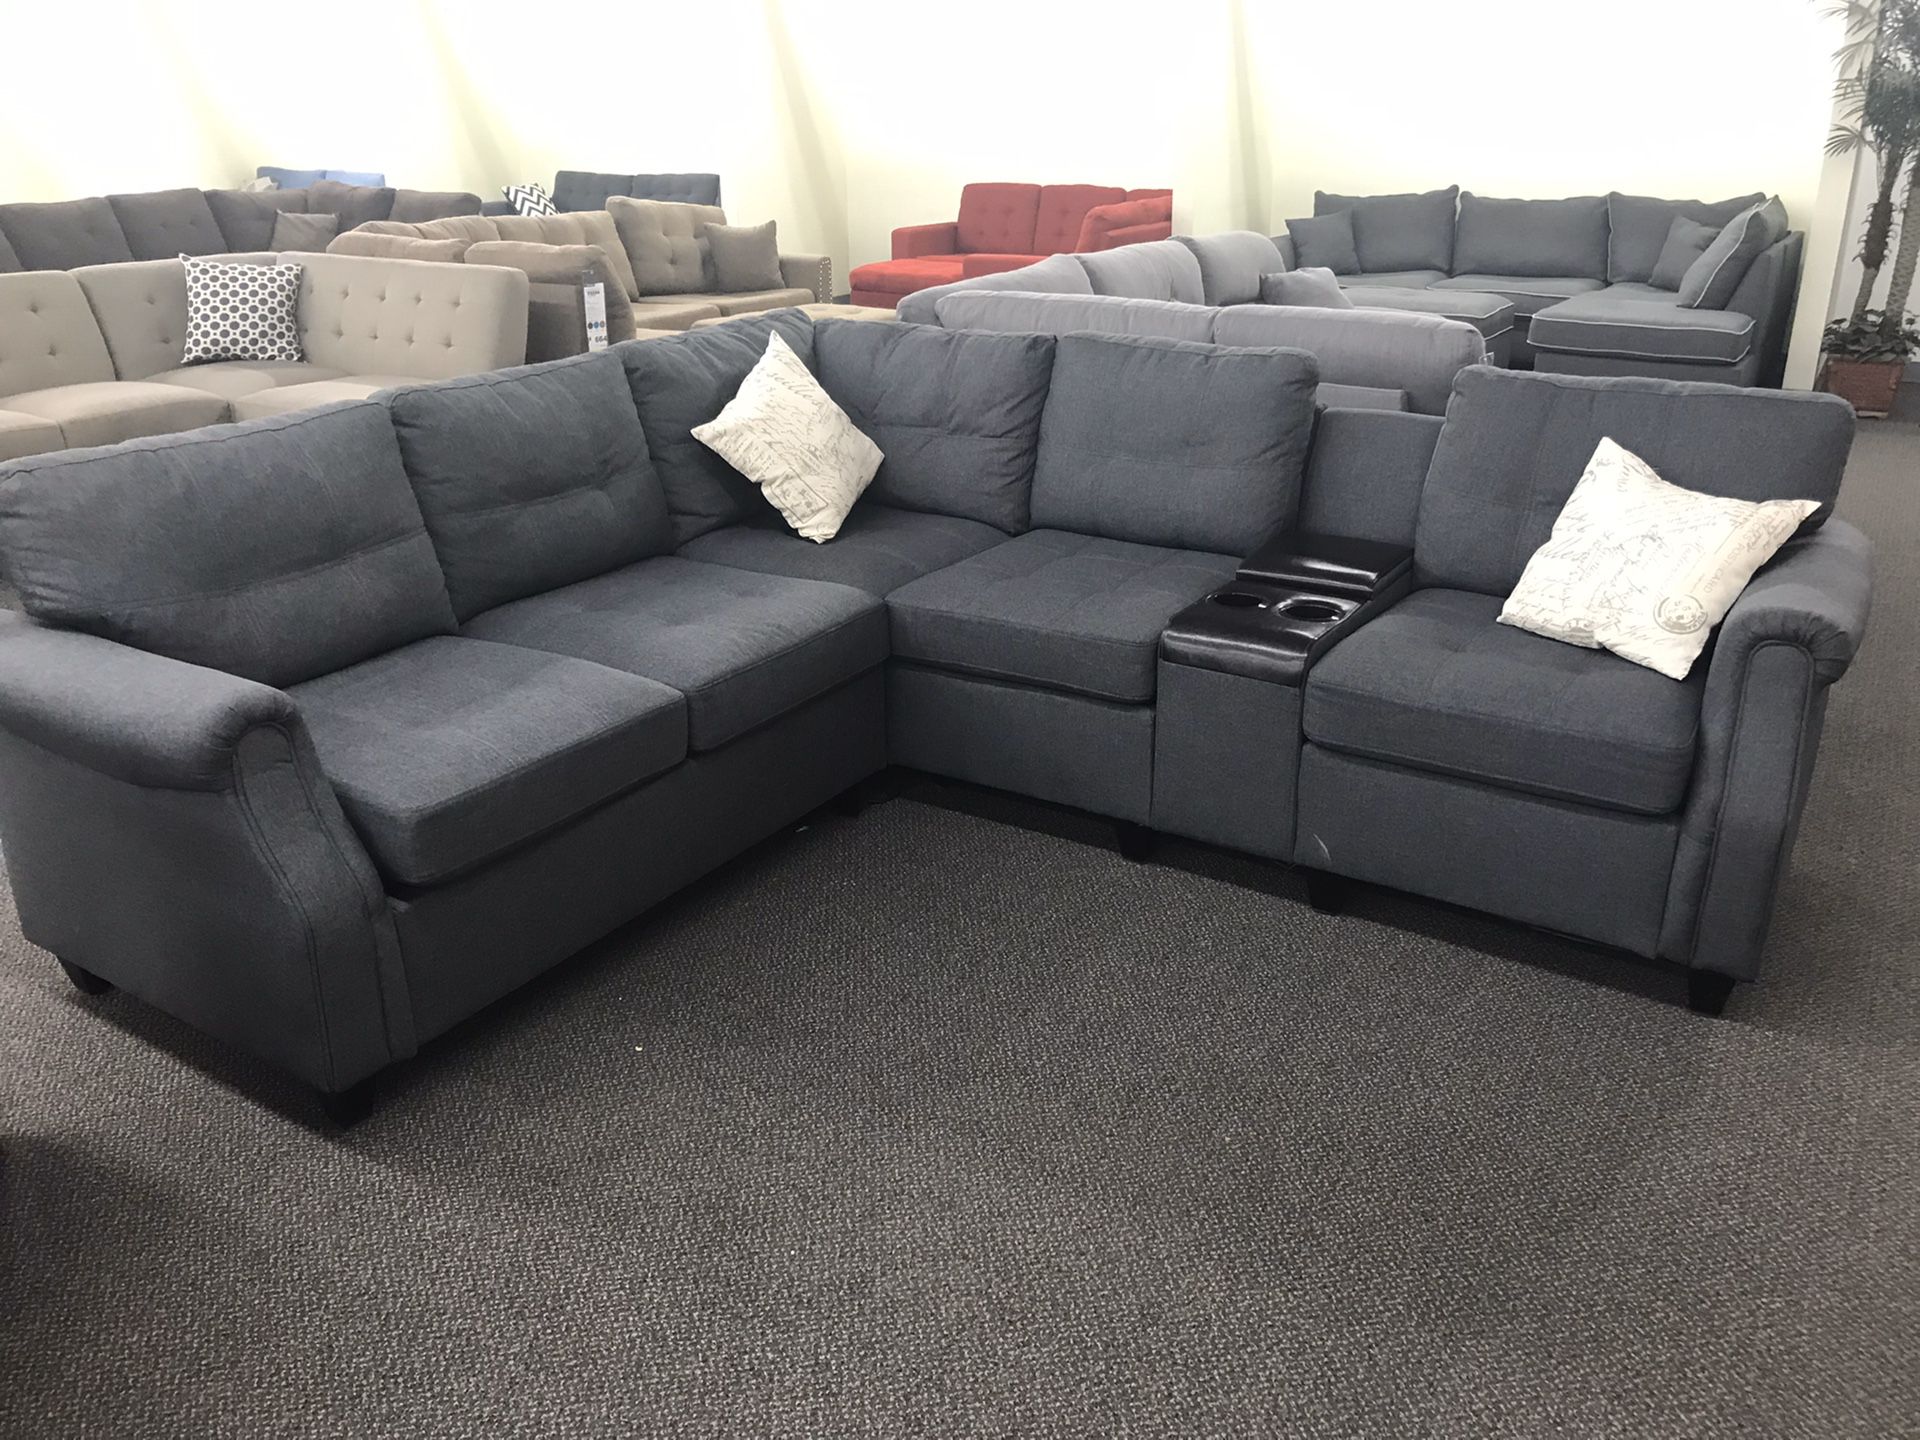 Blue grey sectional sofa w/ USB console (available in three different colors)